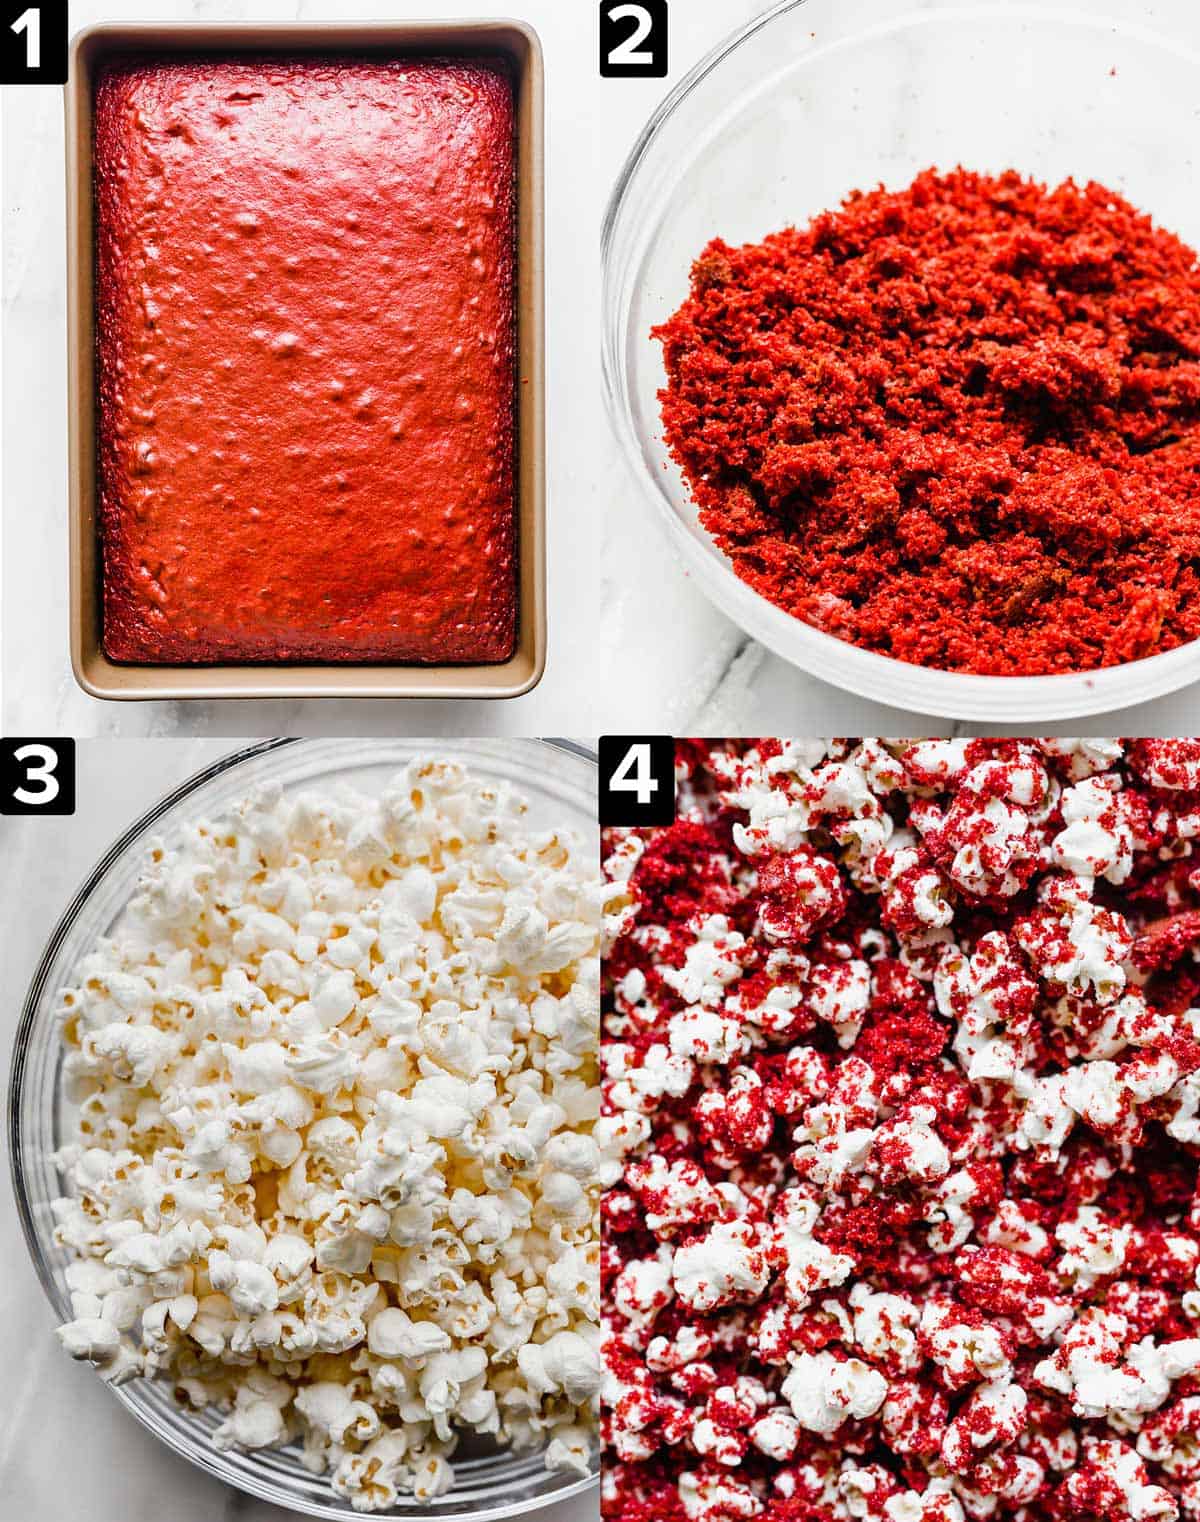 Four images showing how to make Red Velvet Popcorn: a baked red velvet cake in a pan, crumbled red velvet cake in a glass bowl, popcorn in a glass bowl, close up of Red Velvet Popcorn.